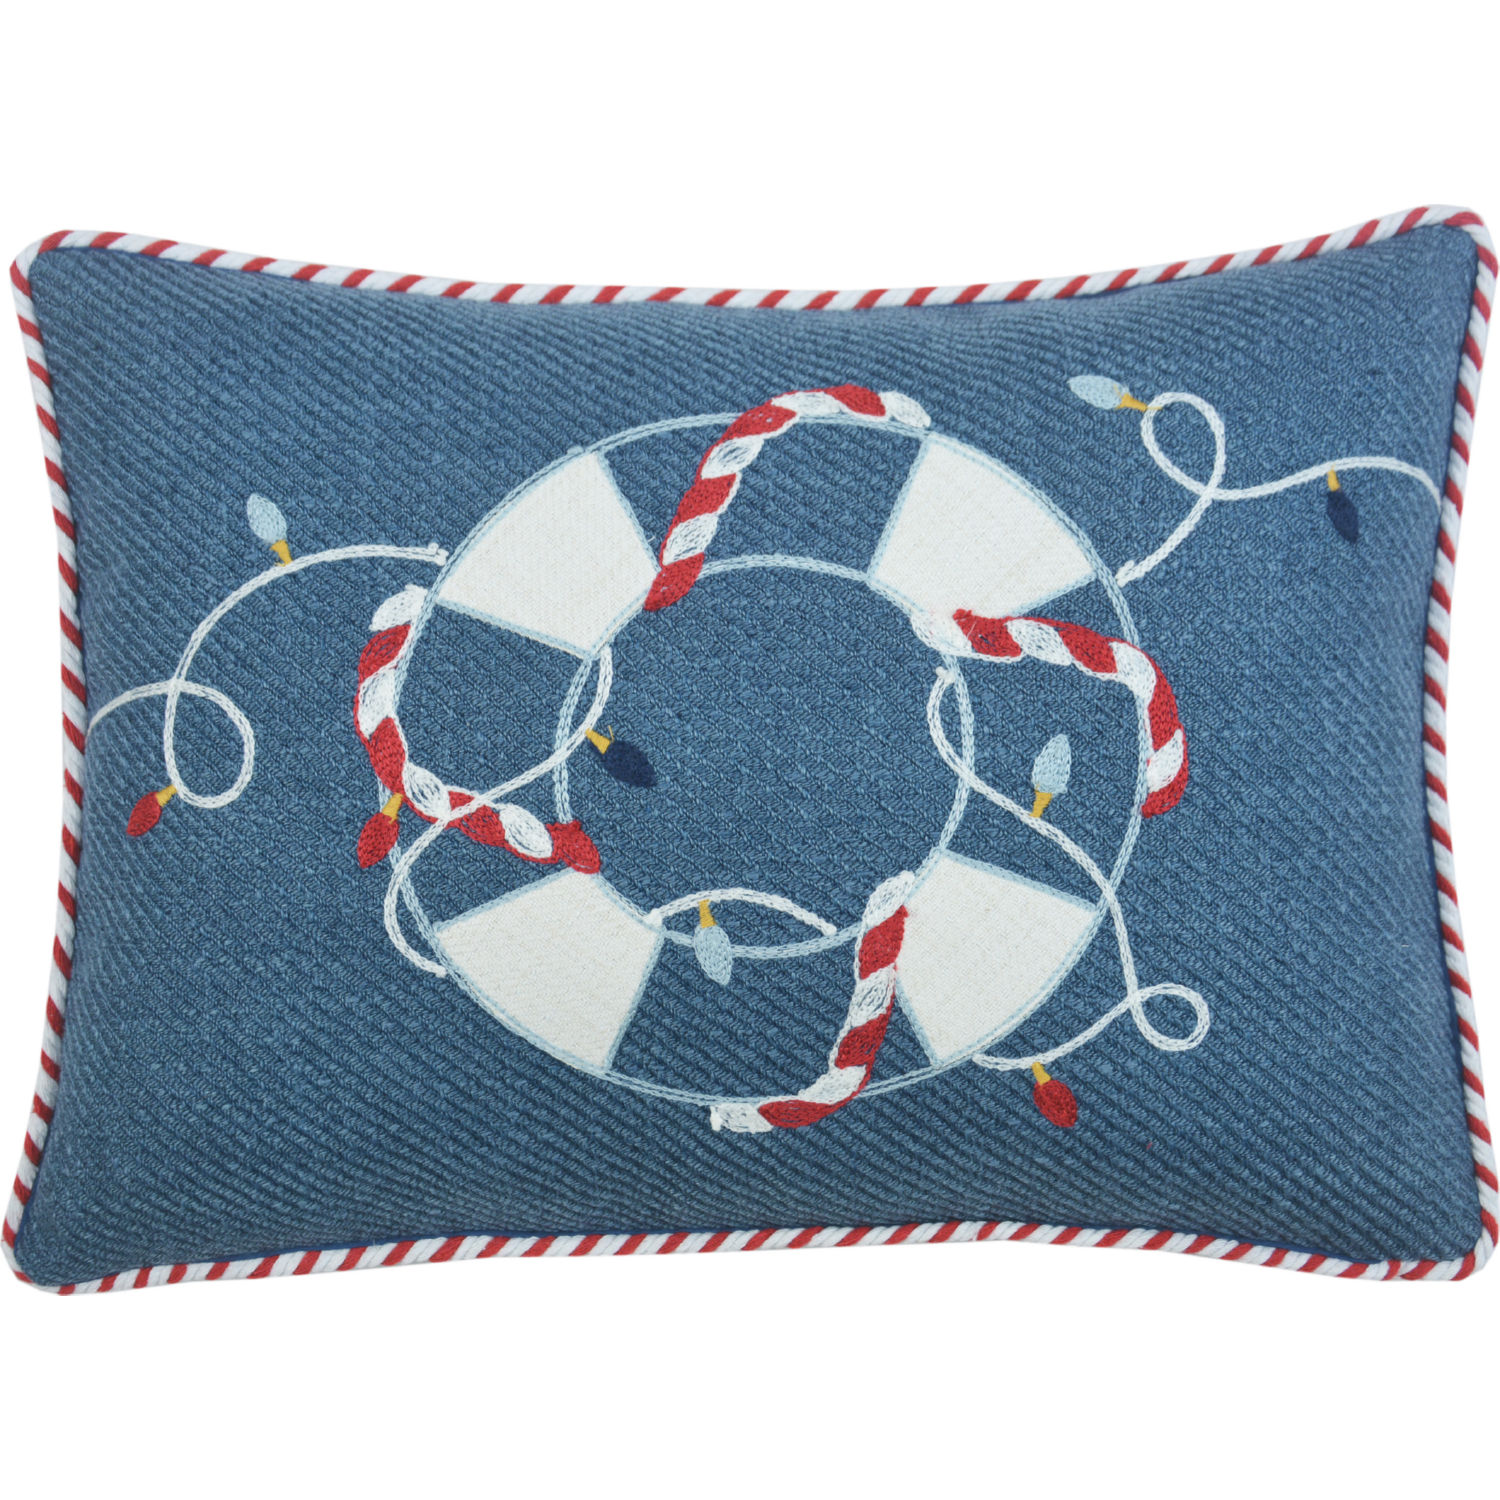 Buy UPOOS Throw Pillow Cover Nautical Rope Pattern Endless Navy